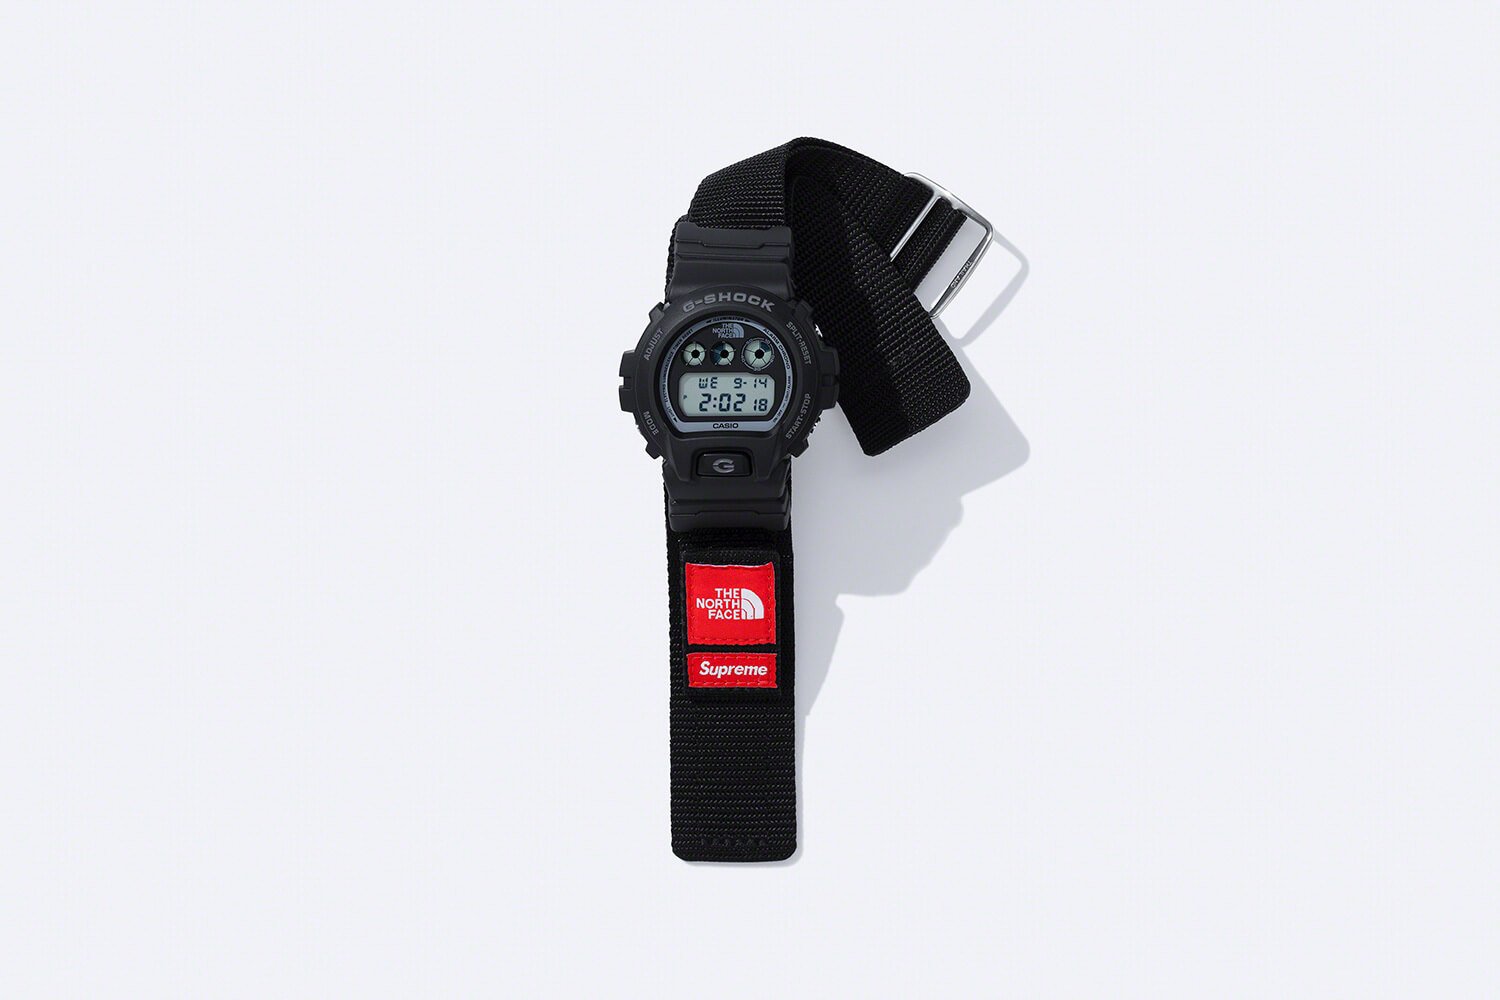 The Supreme x The North Face x G-Shock DW-6900 collaboration is 